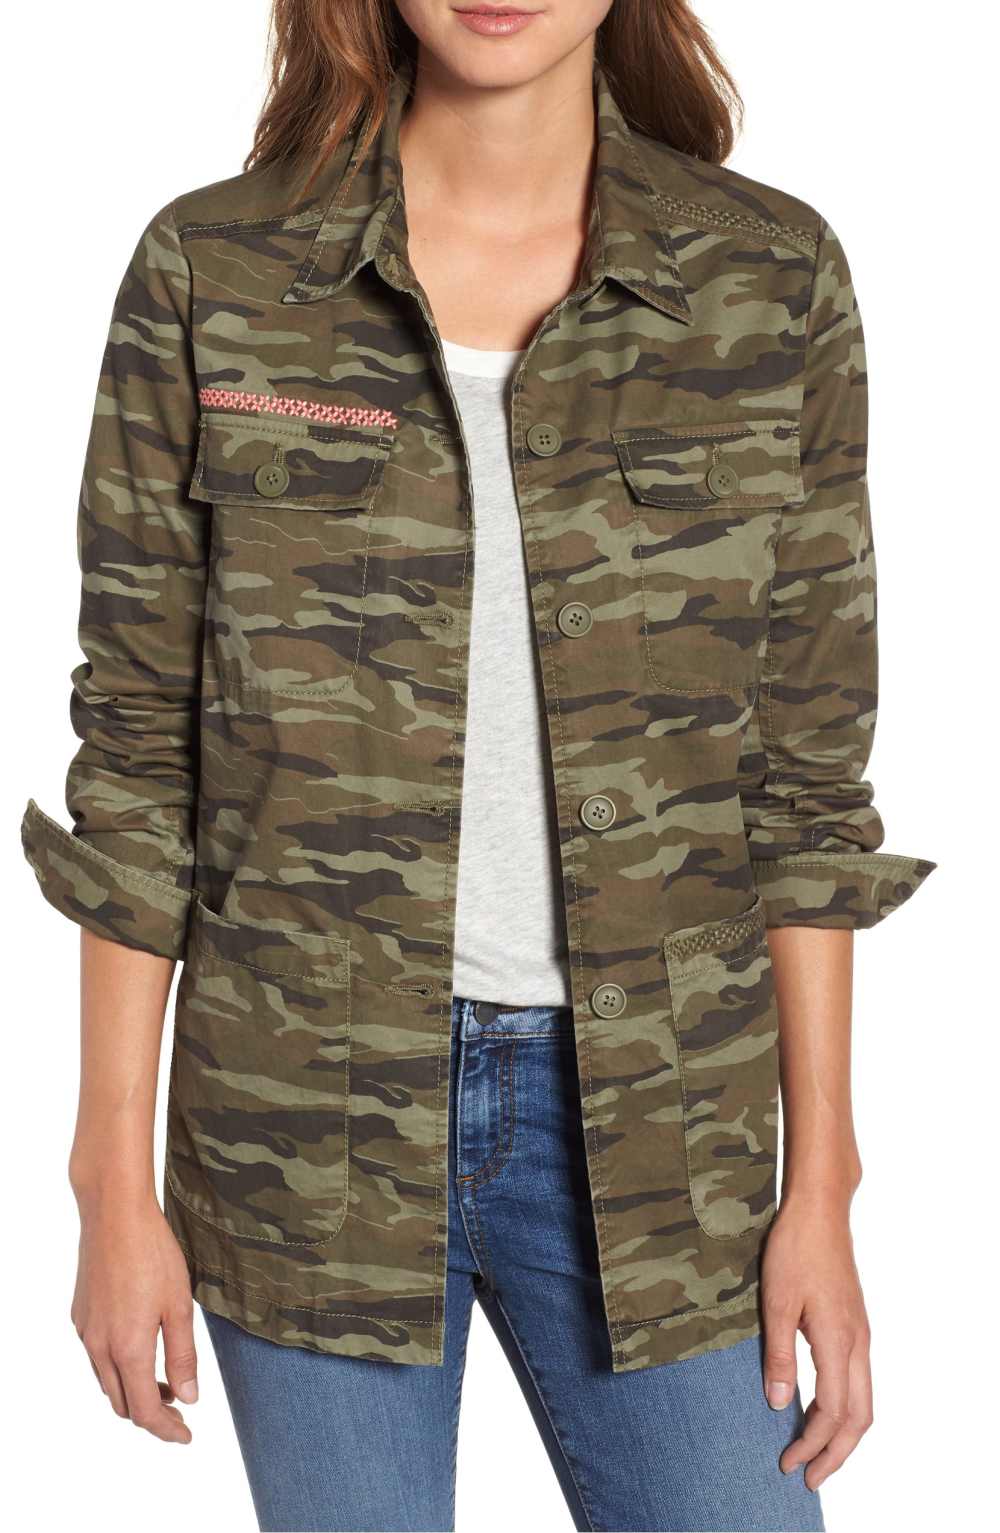 Get Ready for Fall With This Under $100 Caslon Utility Jacket